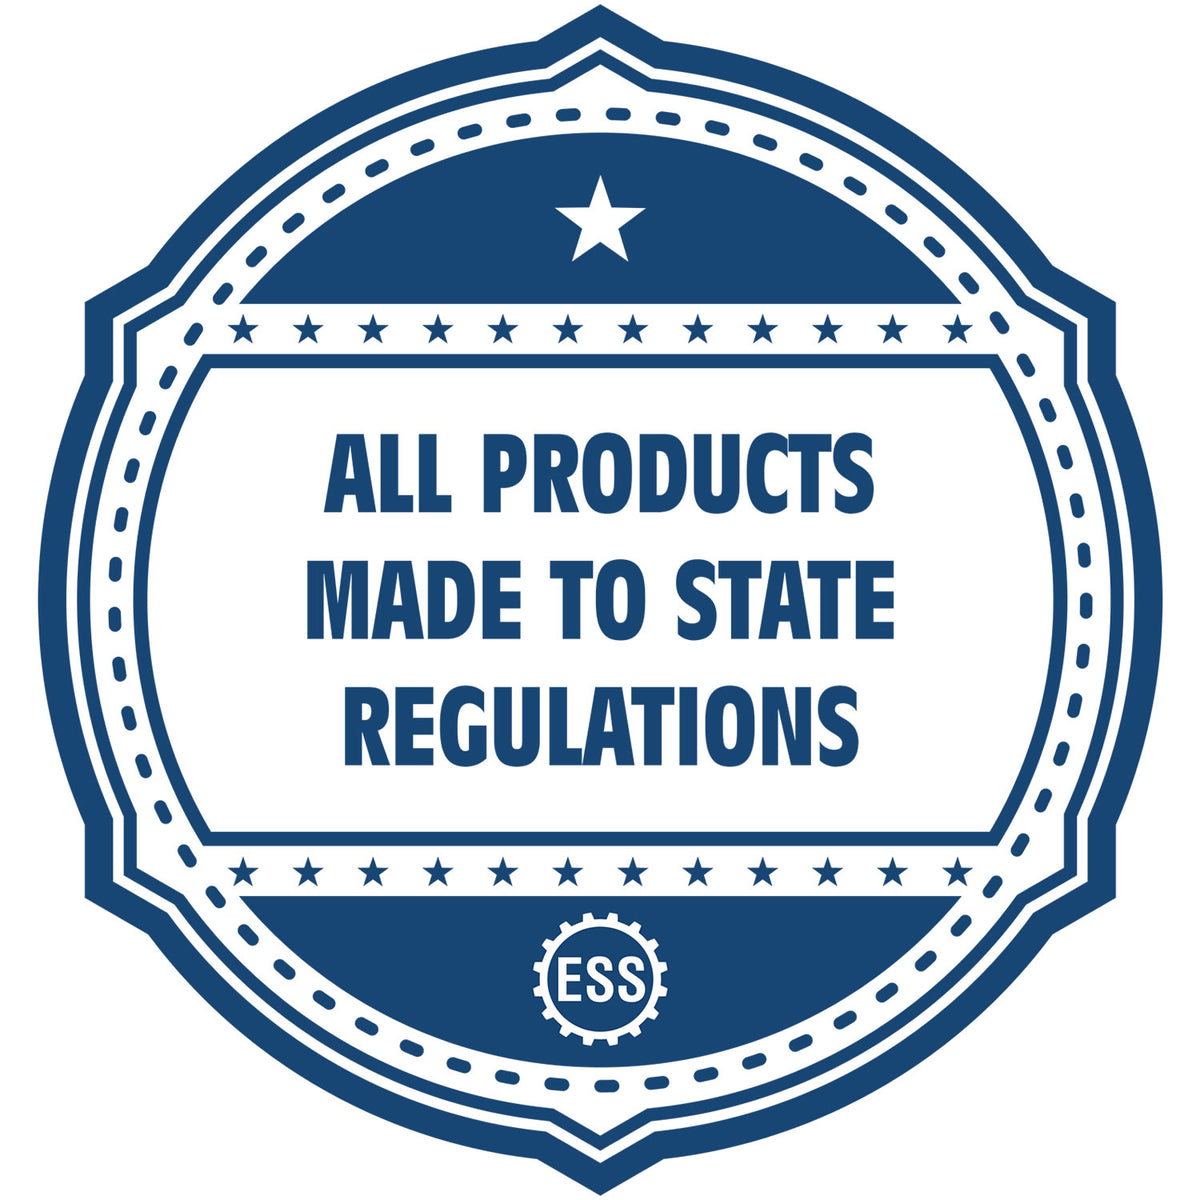 An icon or badge element for the Digital New Hampshire Landscape Architect Stamp showing that this product is made in compliance with state regulations.